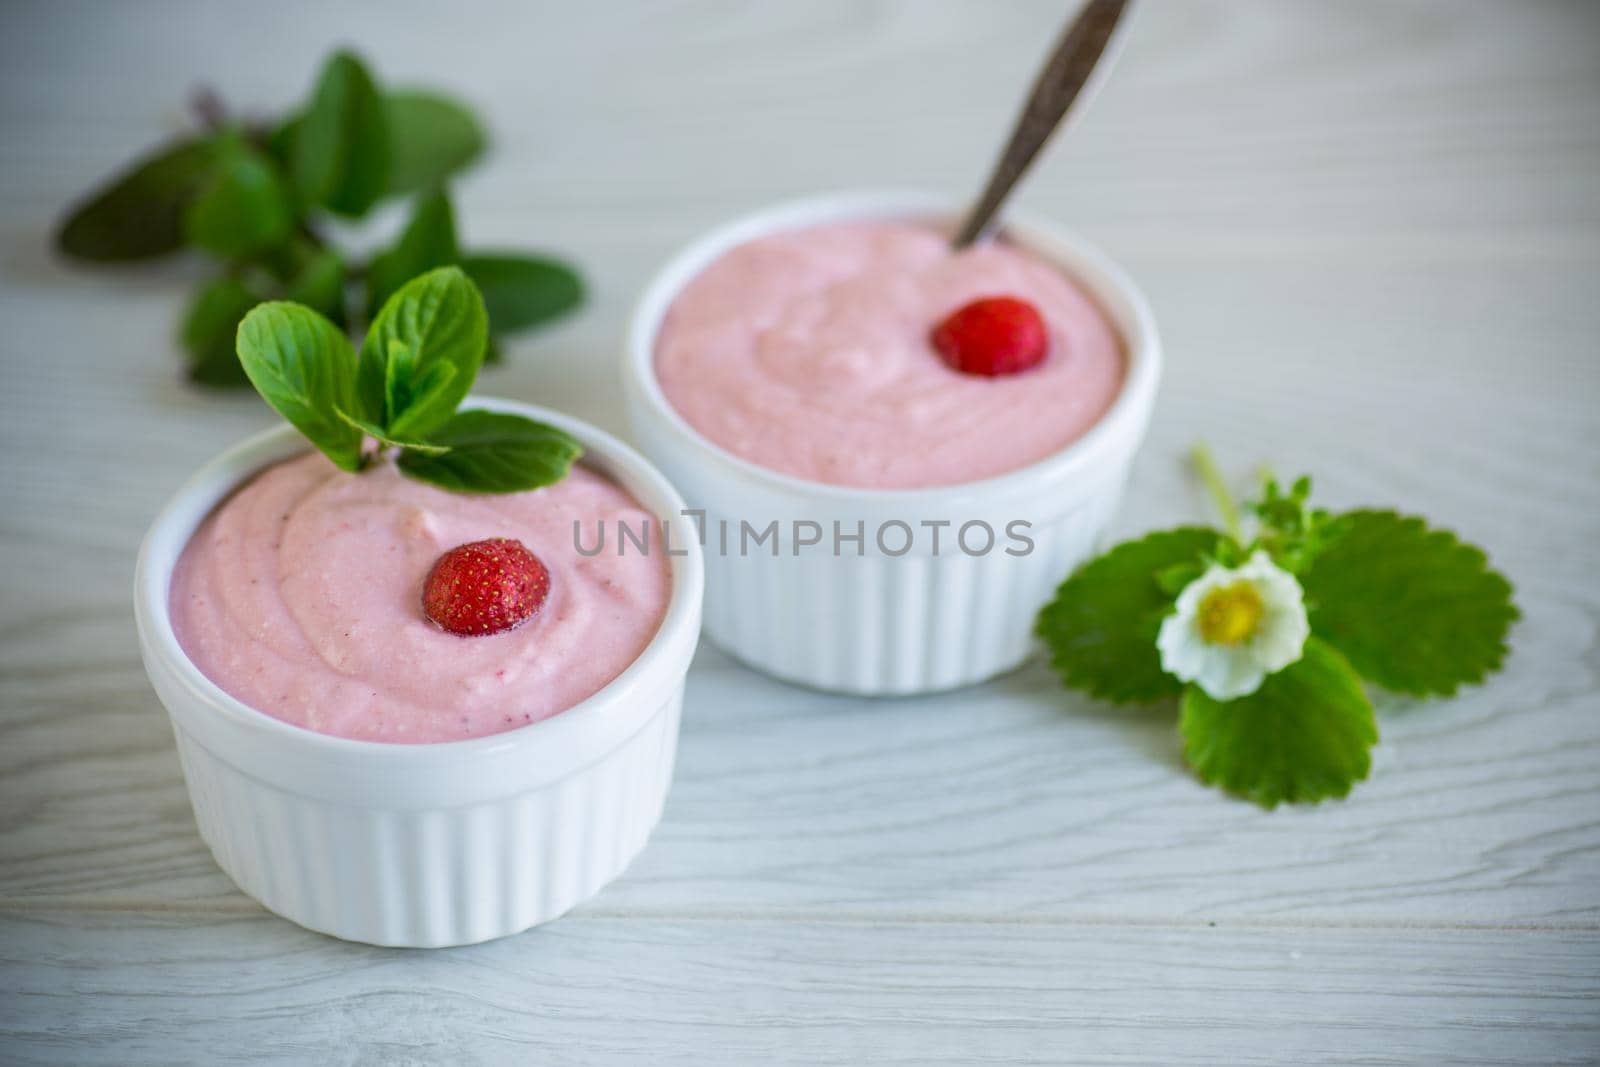 sweet curd mass whipped with fresh strawberries in a bowl, on a wooden table.